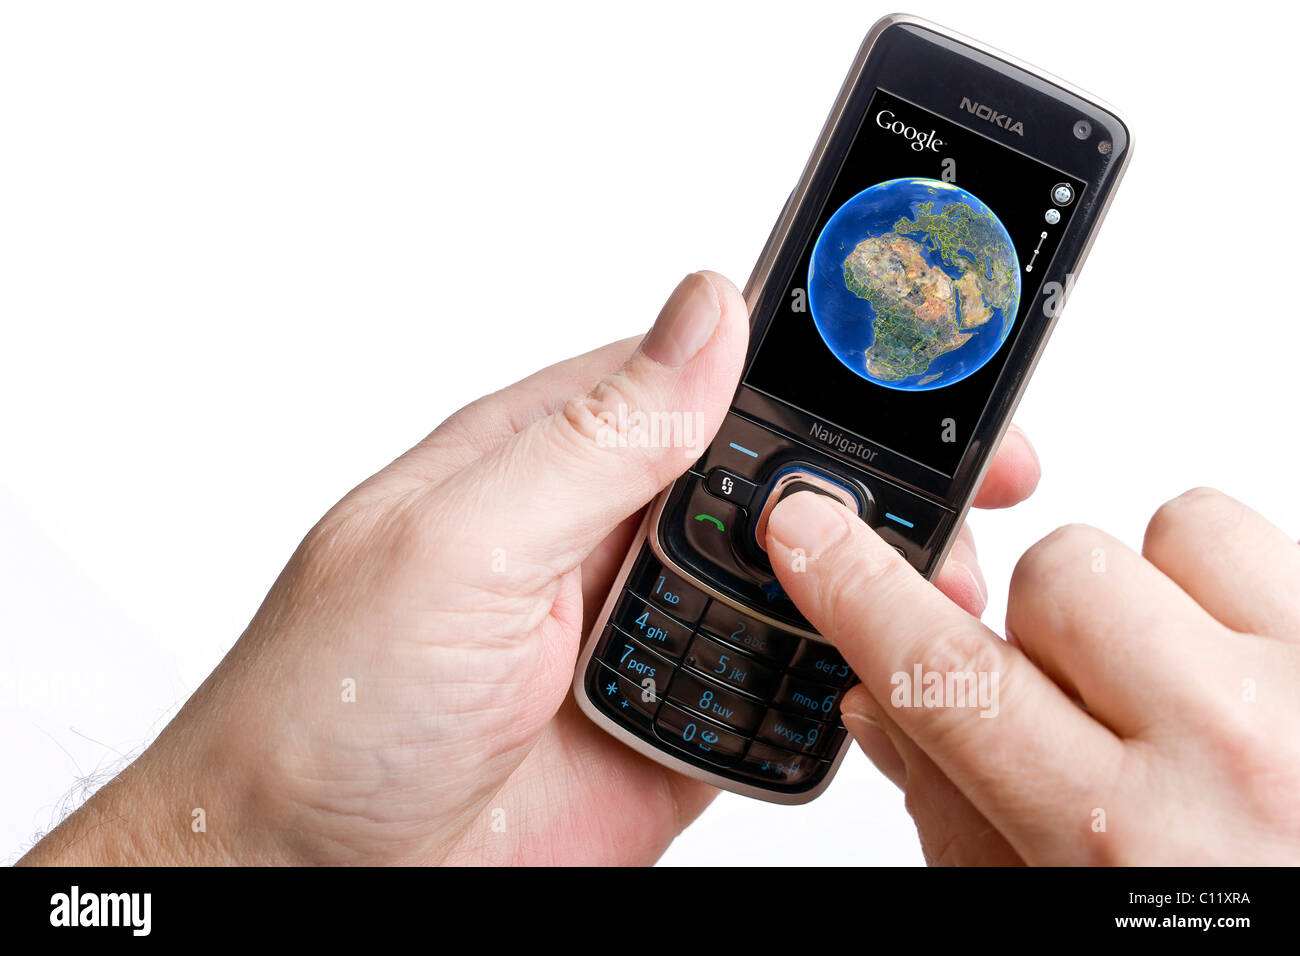 Using Google earth on a mobile phone Stock Photo